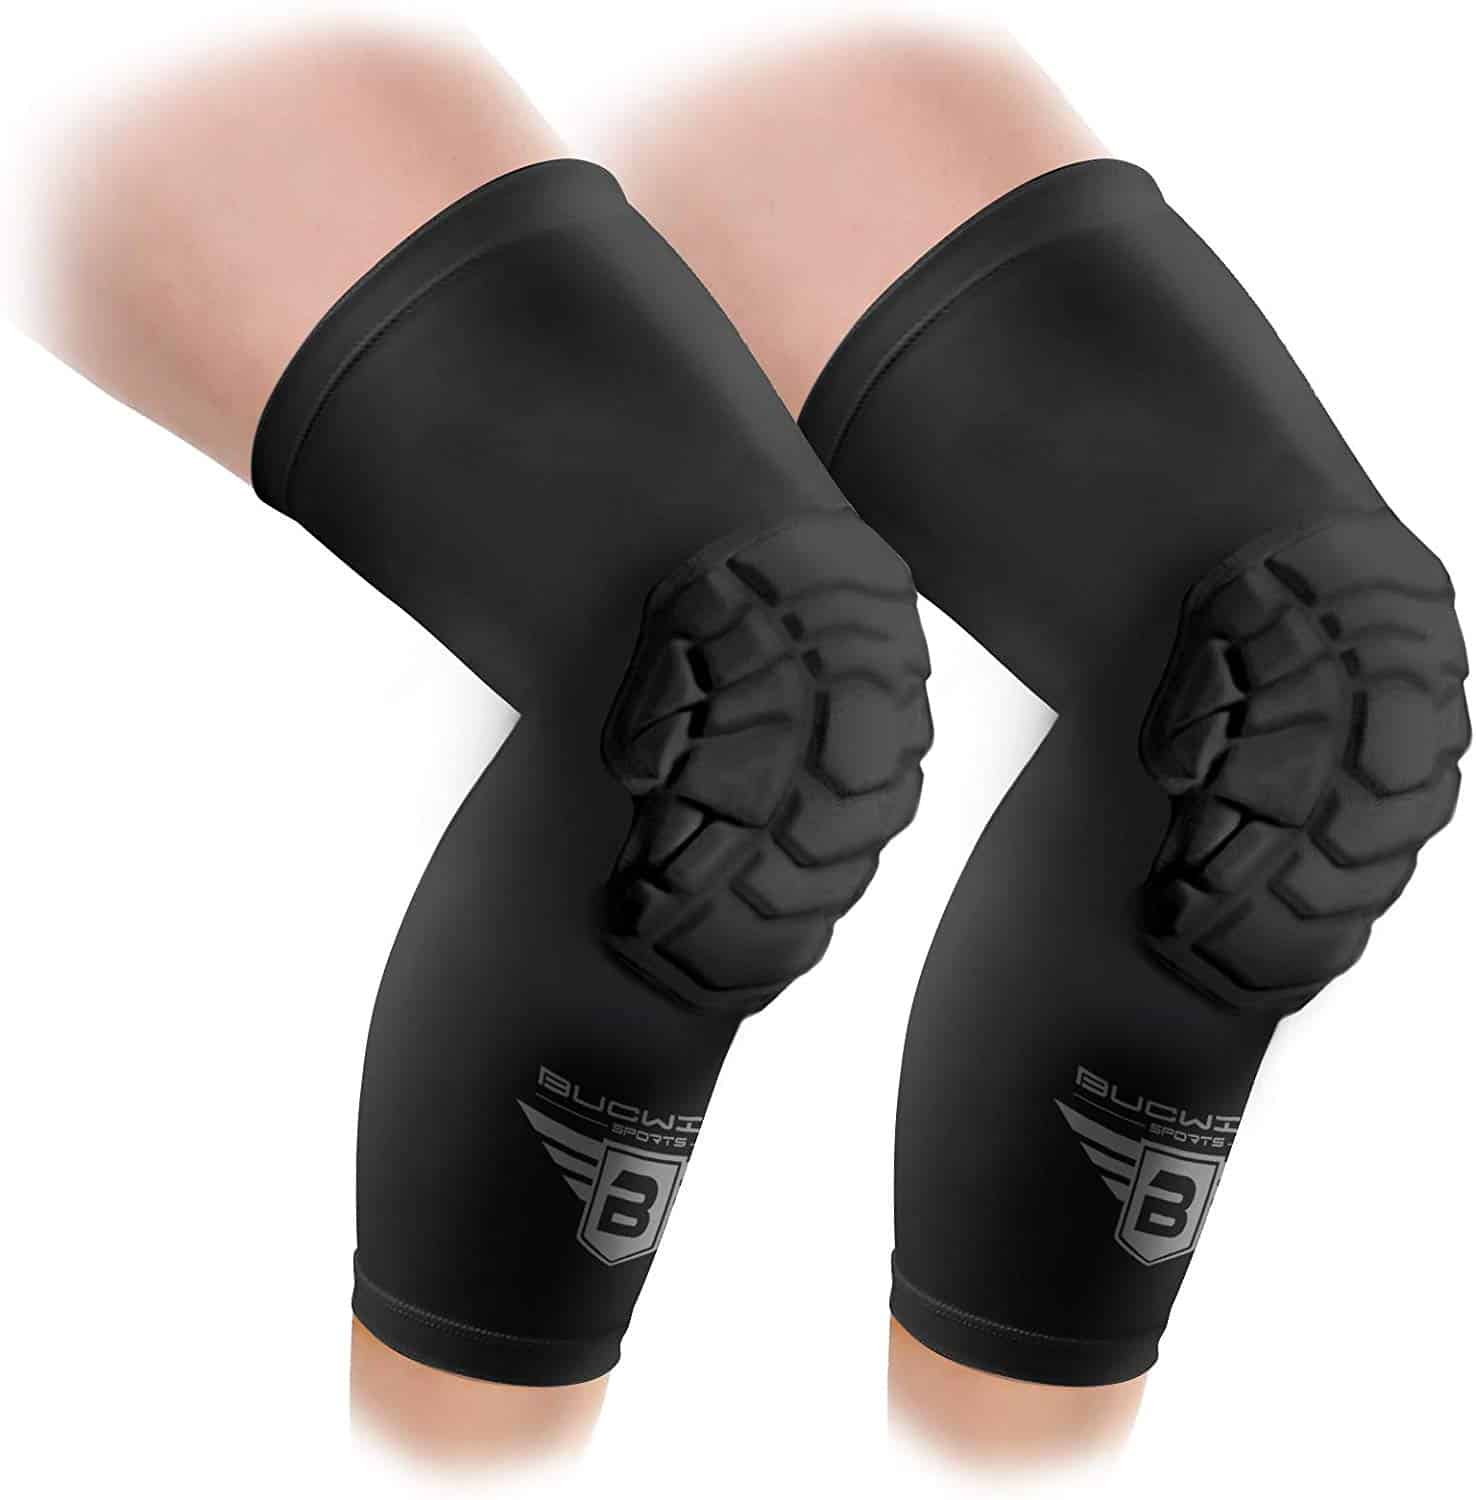 Best Volleyball Knee Pads in 2020 (Review & Guide ...